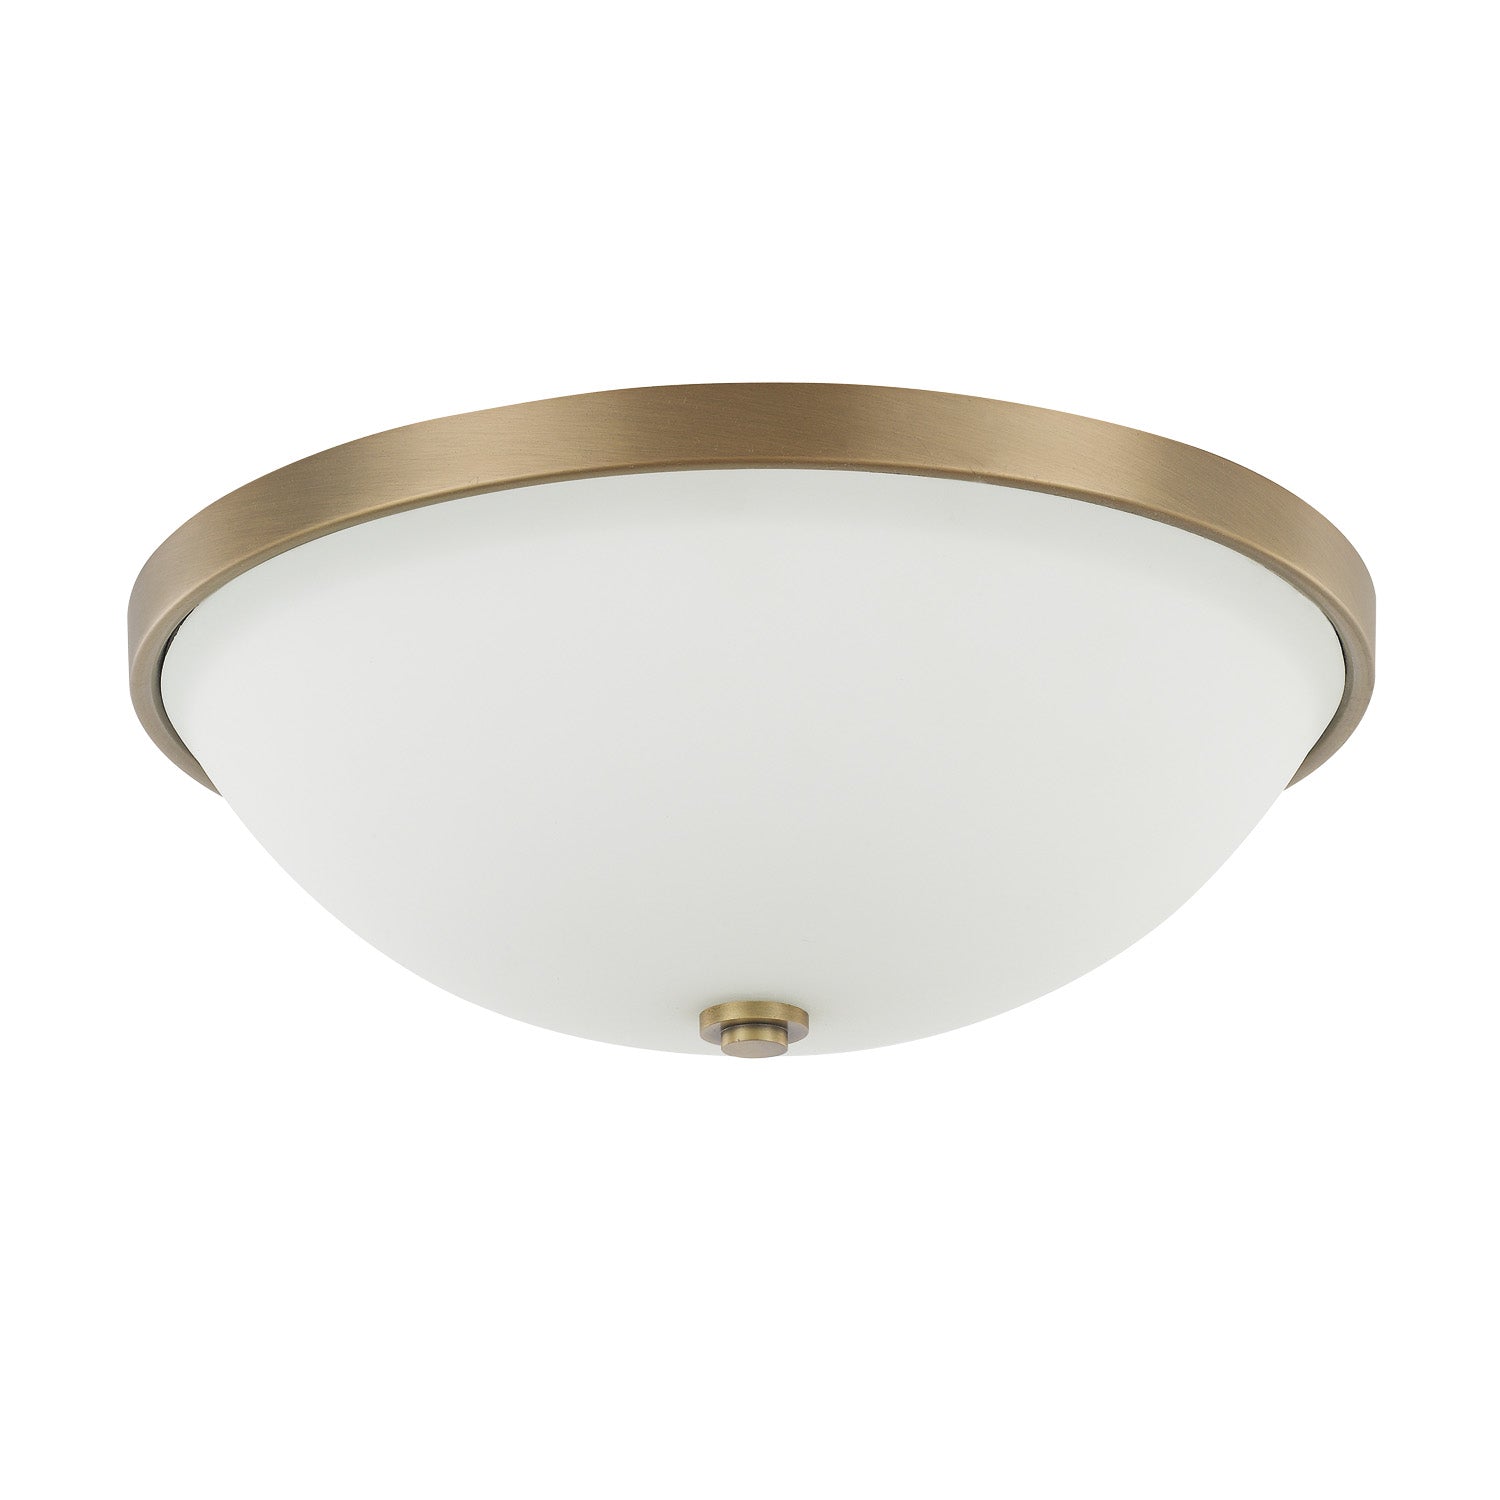 Capital Perkins 2325AD-SW Ceiling Light - Aged Brass